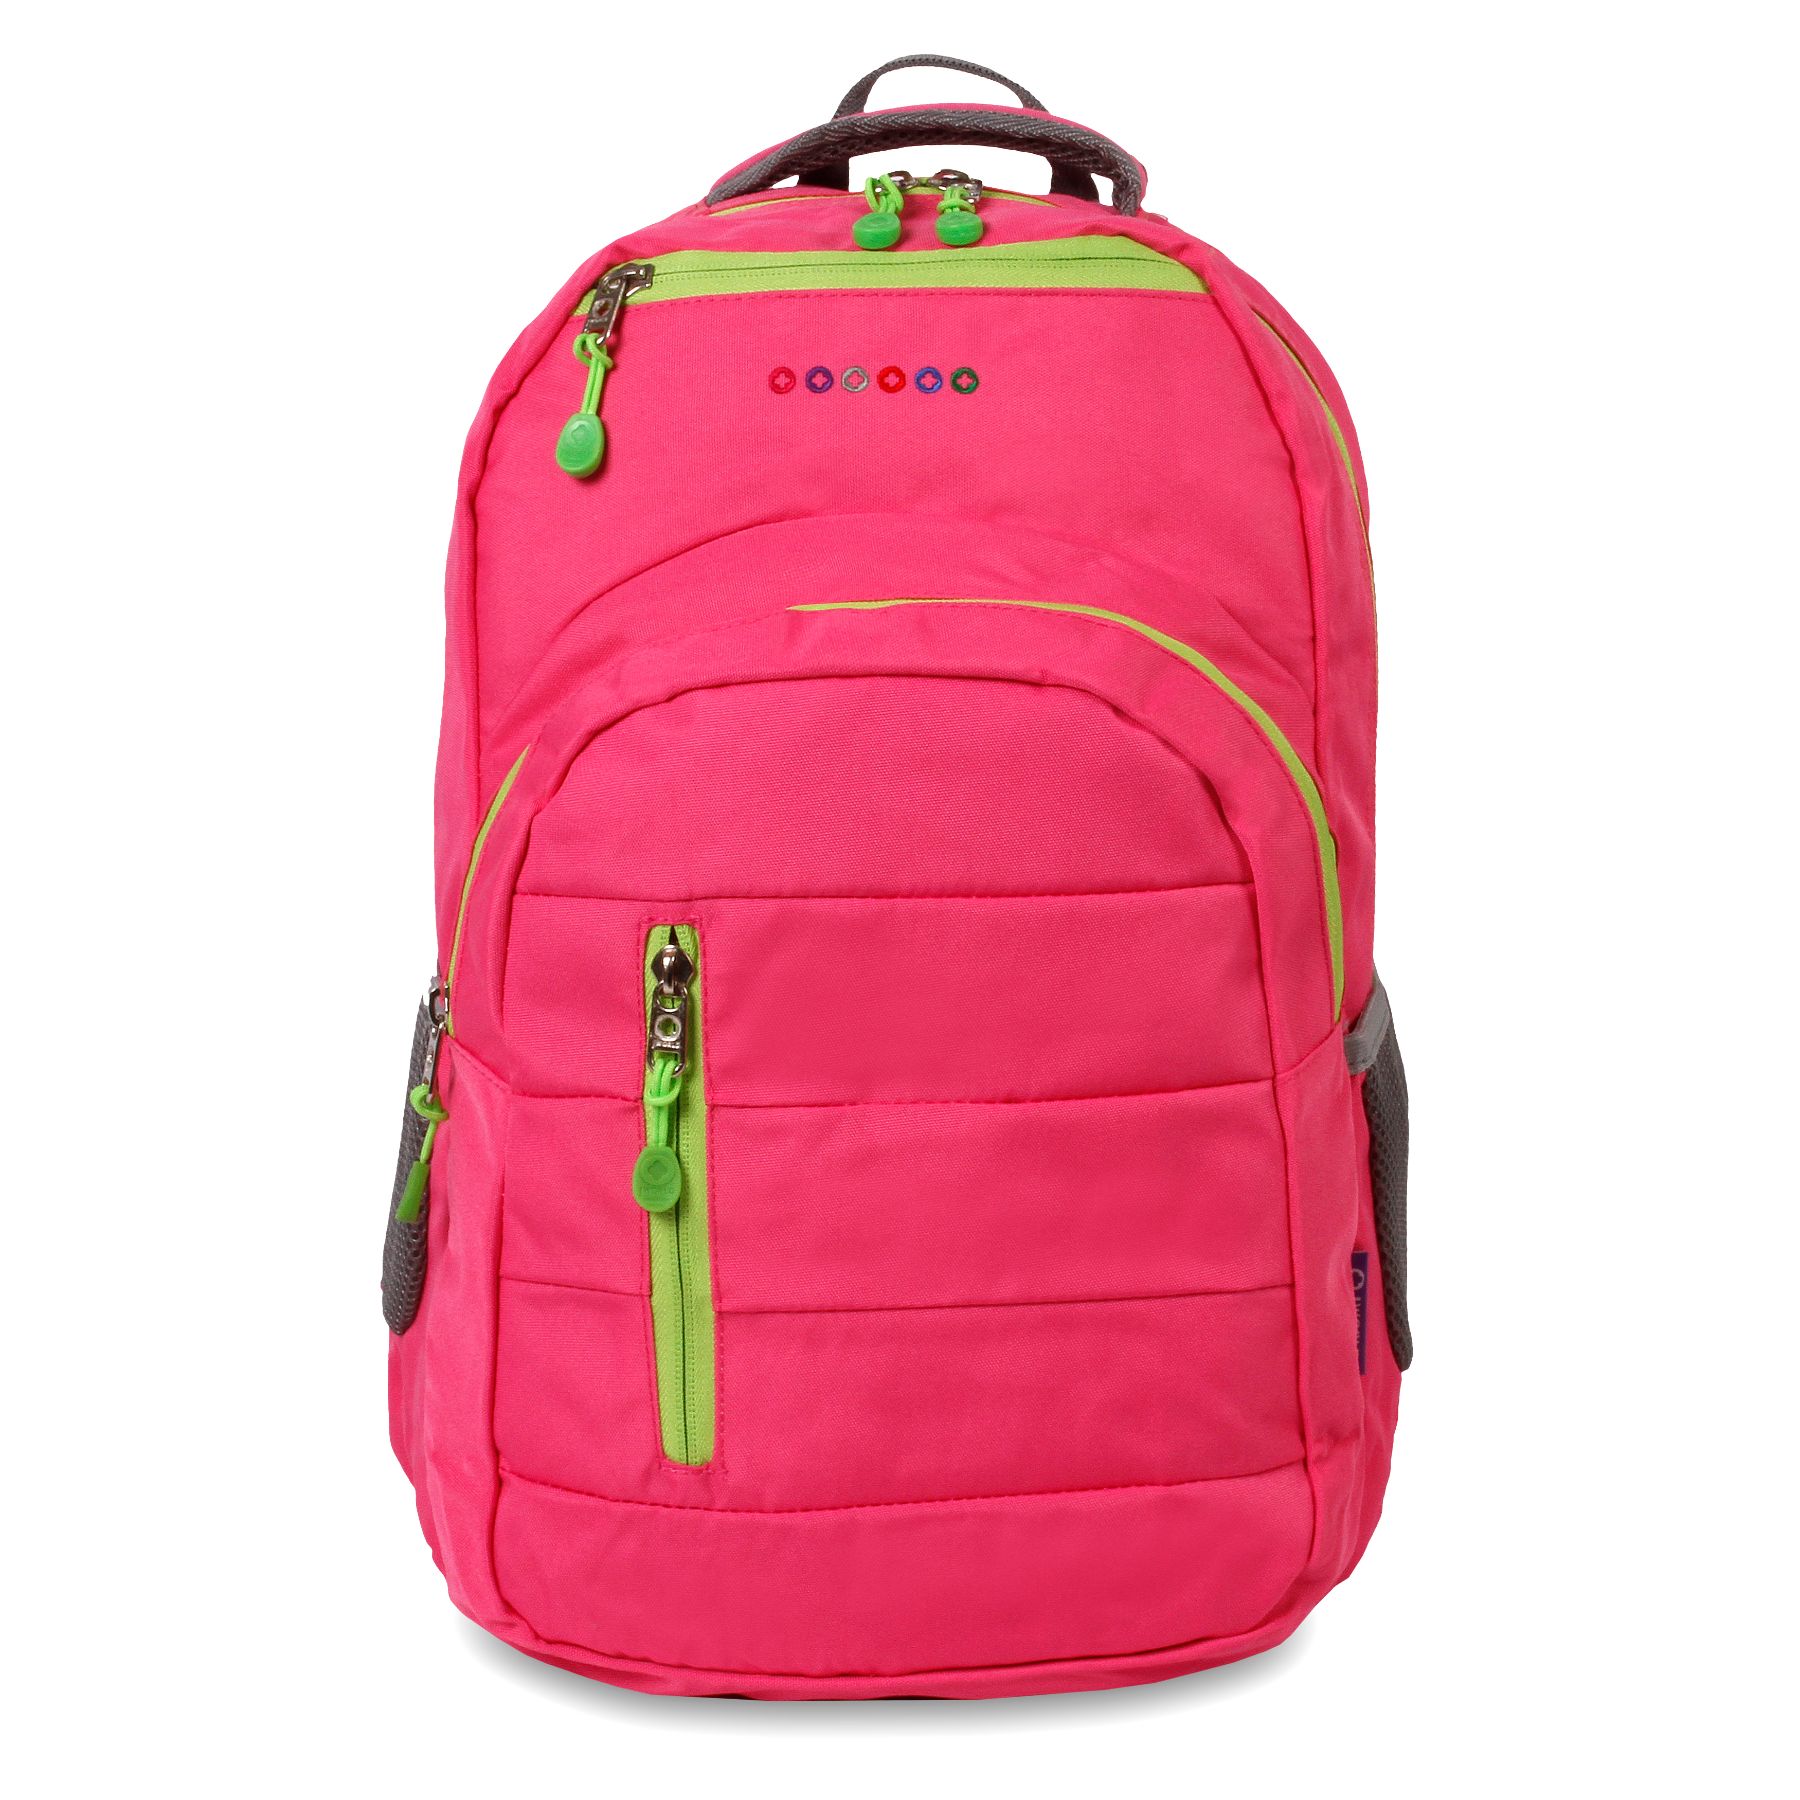 J World Womens Carment 16" Laptop Backpack, Pink - image 1 of 6